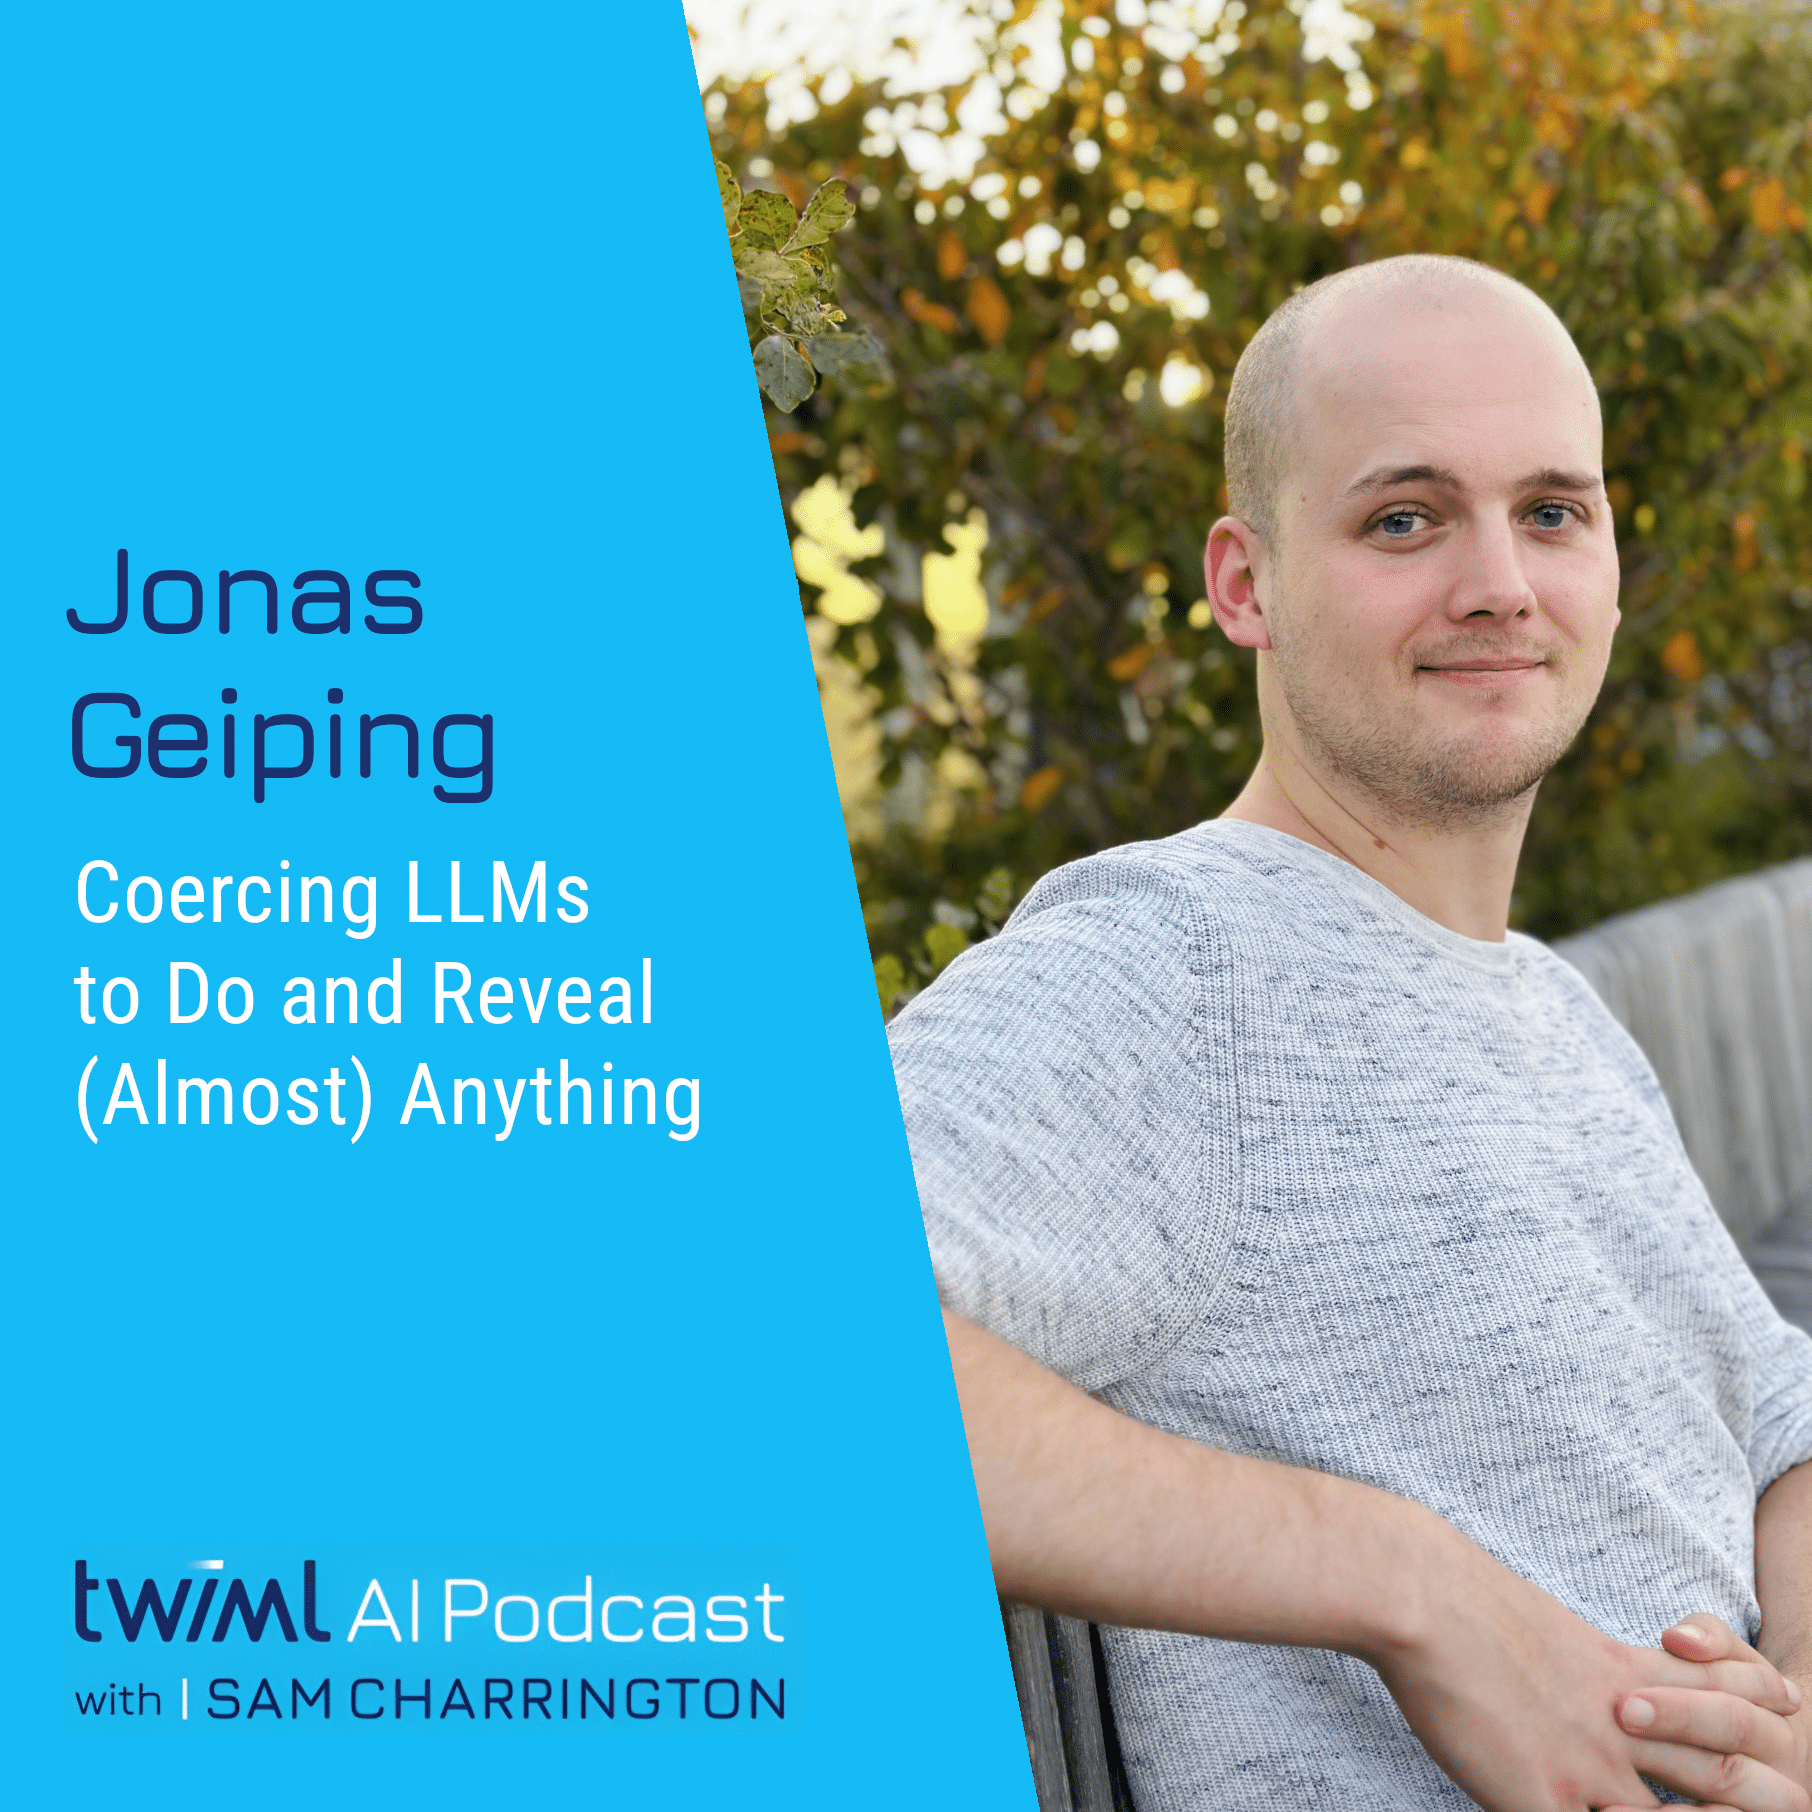 twiml-jonas-geiping-coercing-llms-to-do-and-reveal-almost-anything-sq